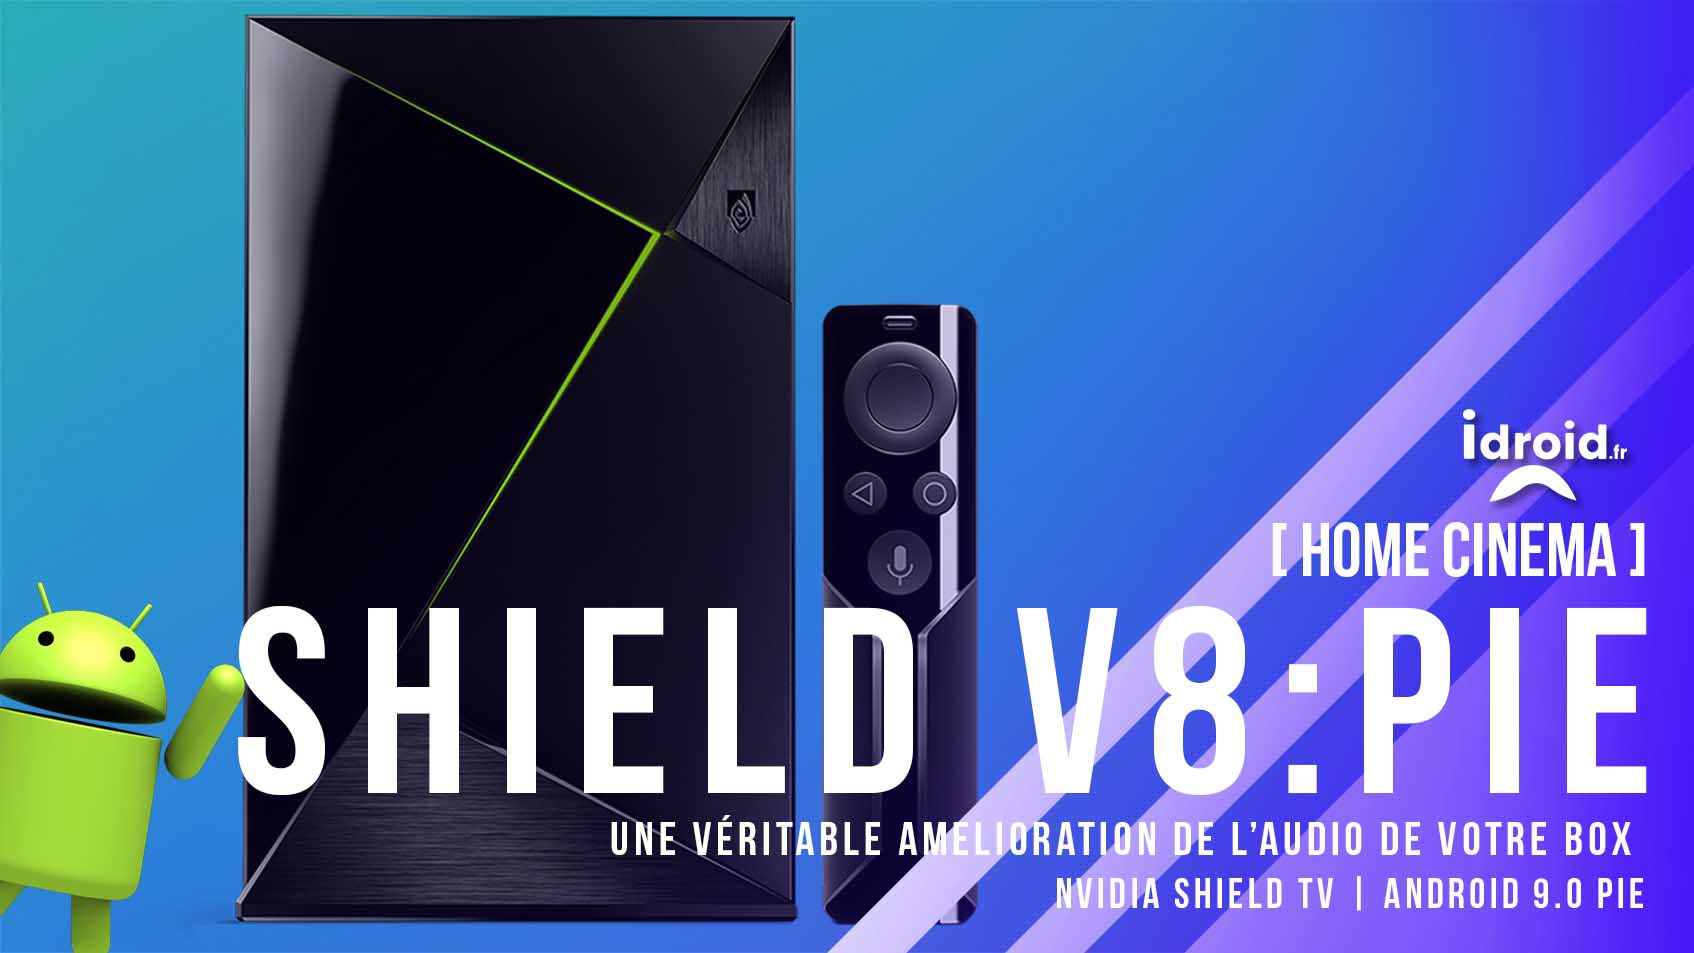 Shield TV maj V8.0 pour Android 9.0Pie améliorations audio streaming